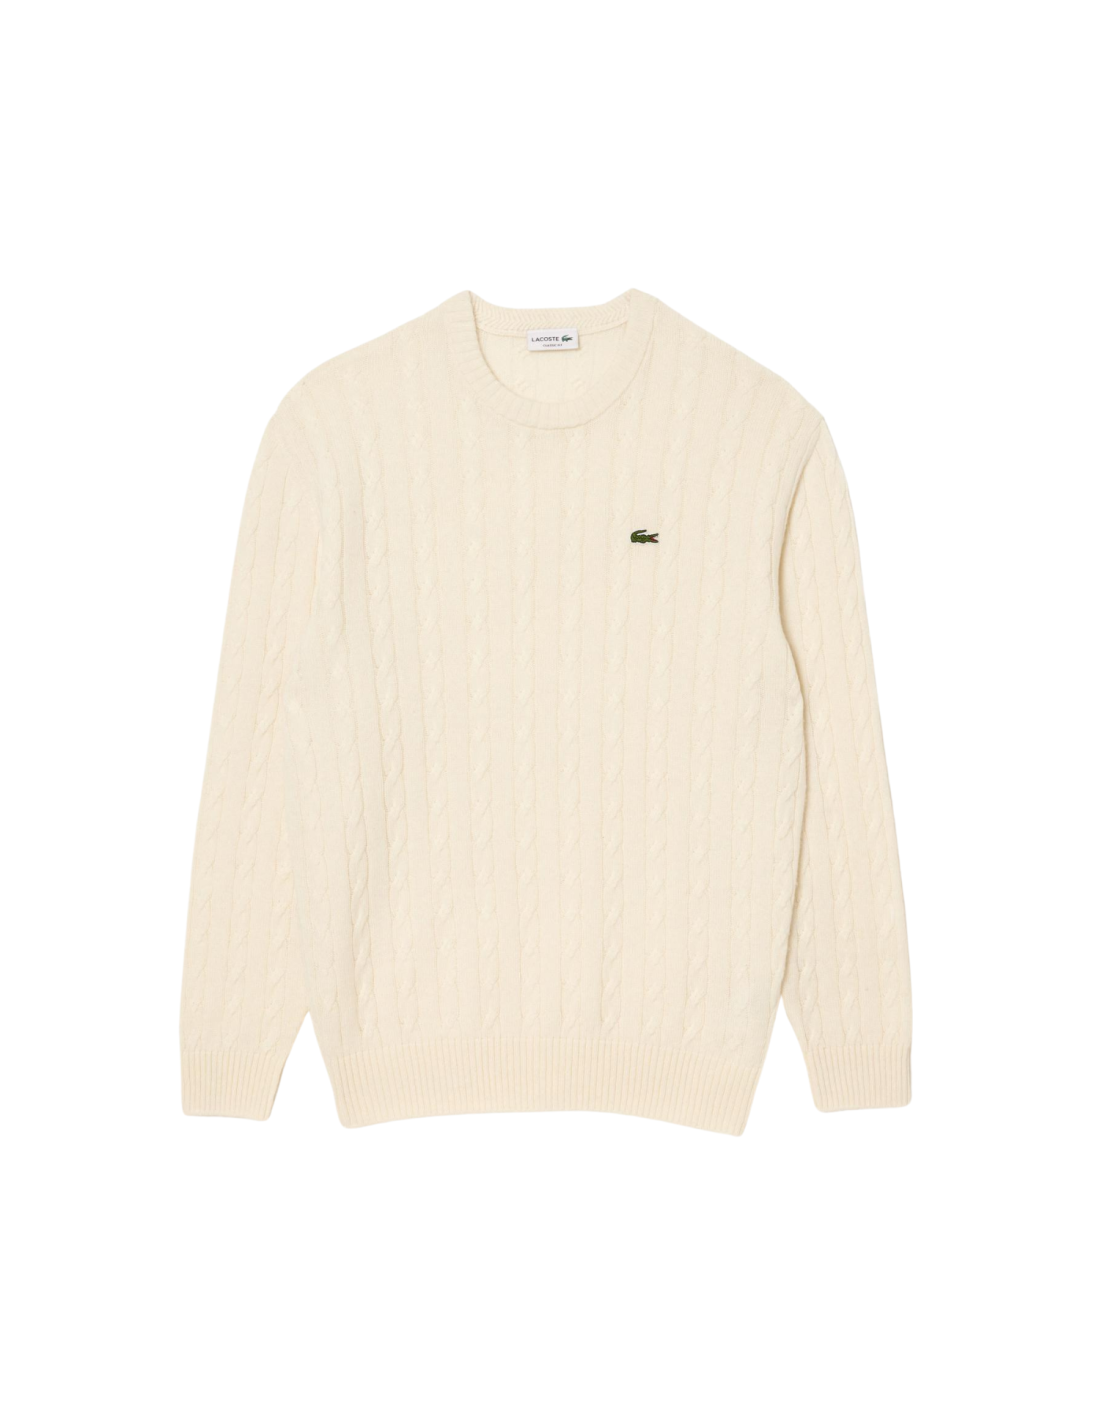 Men's Wool Lacoste Crew Neck with cable Detail Sweater